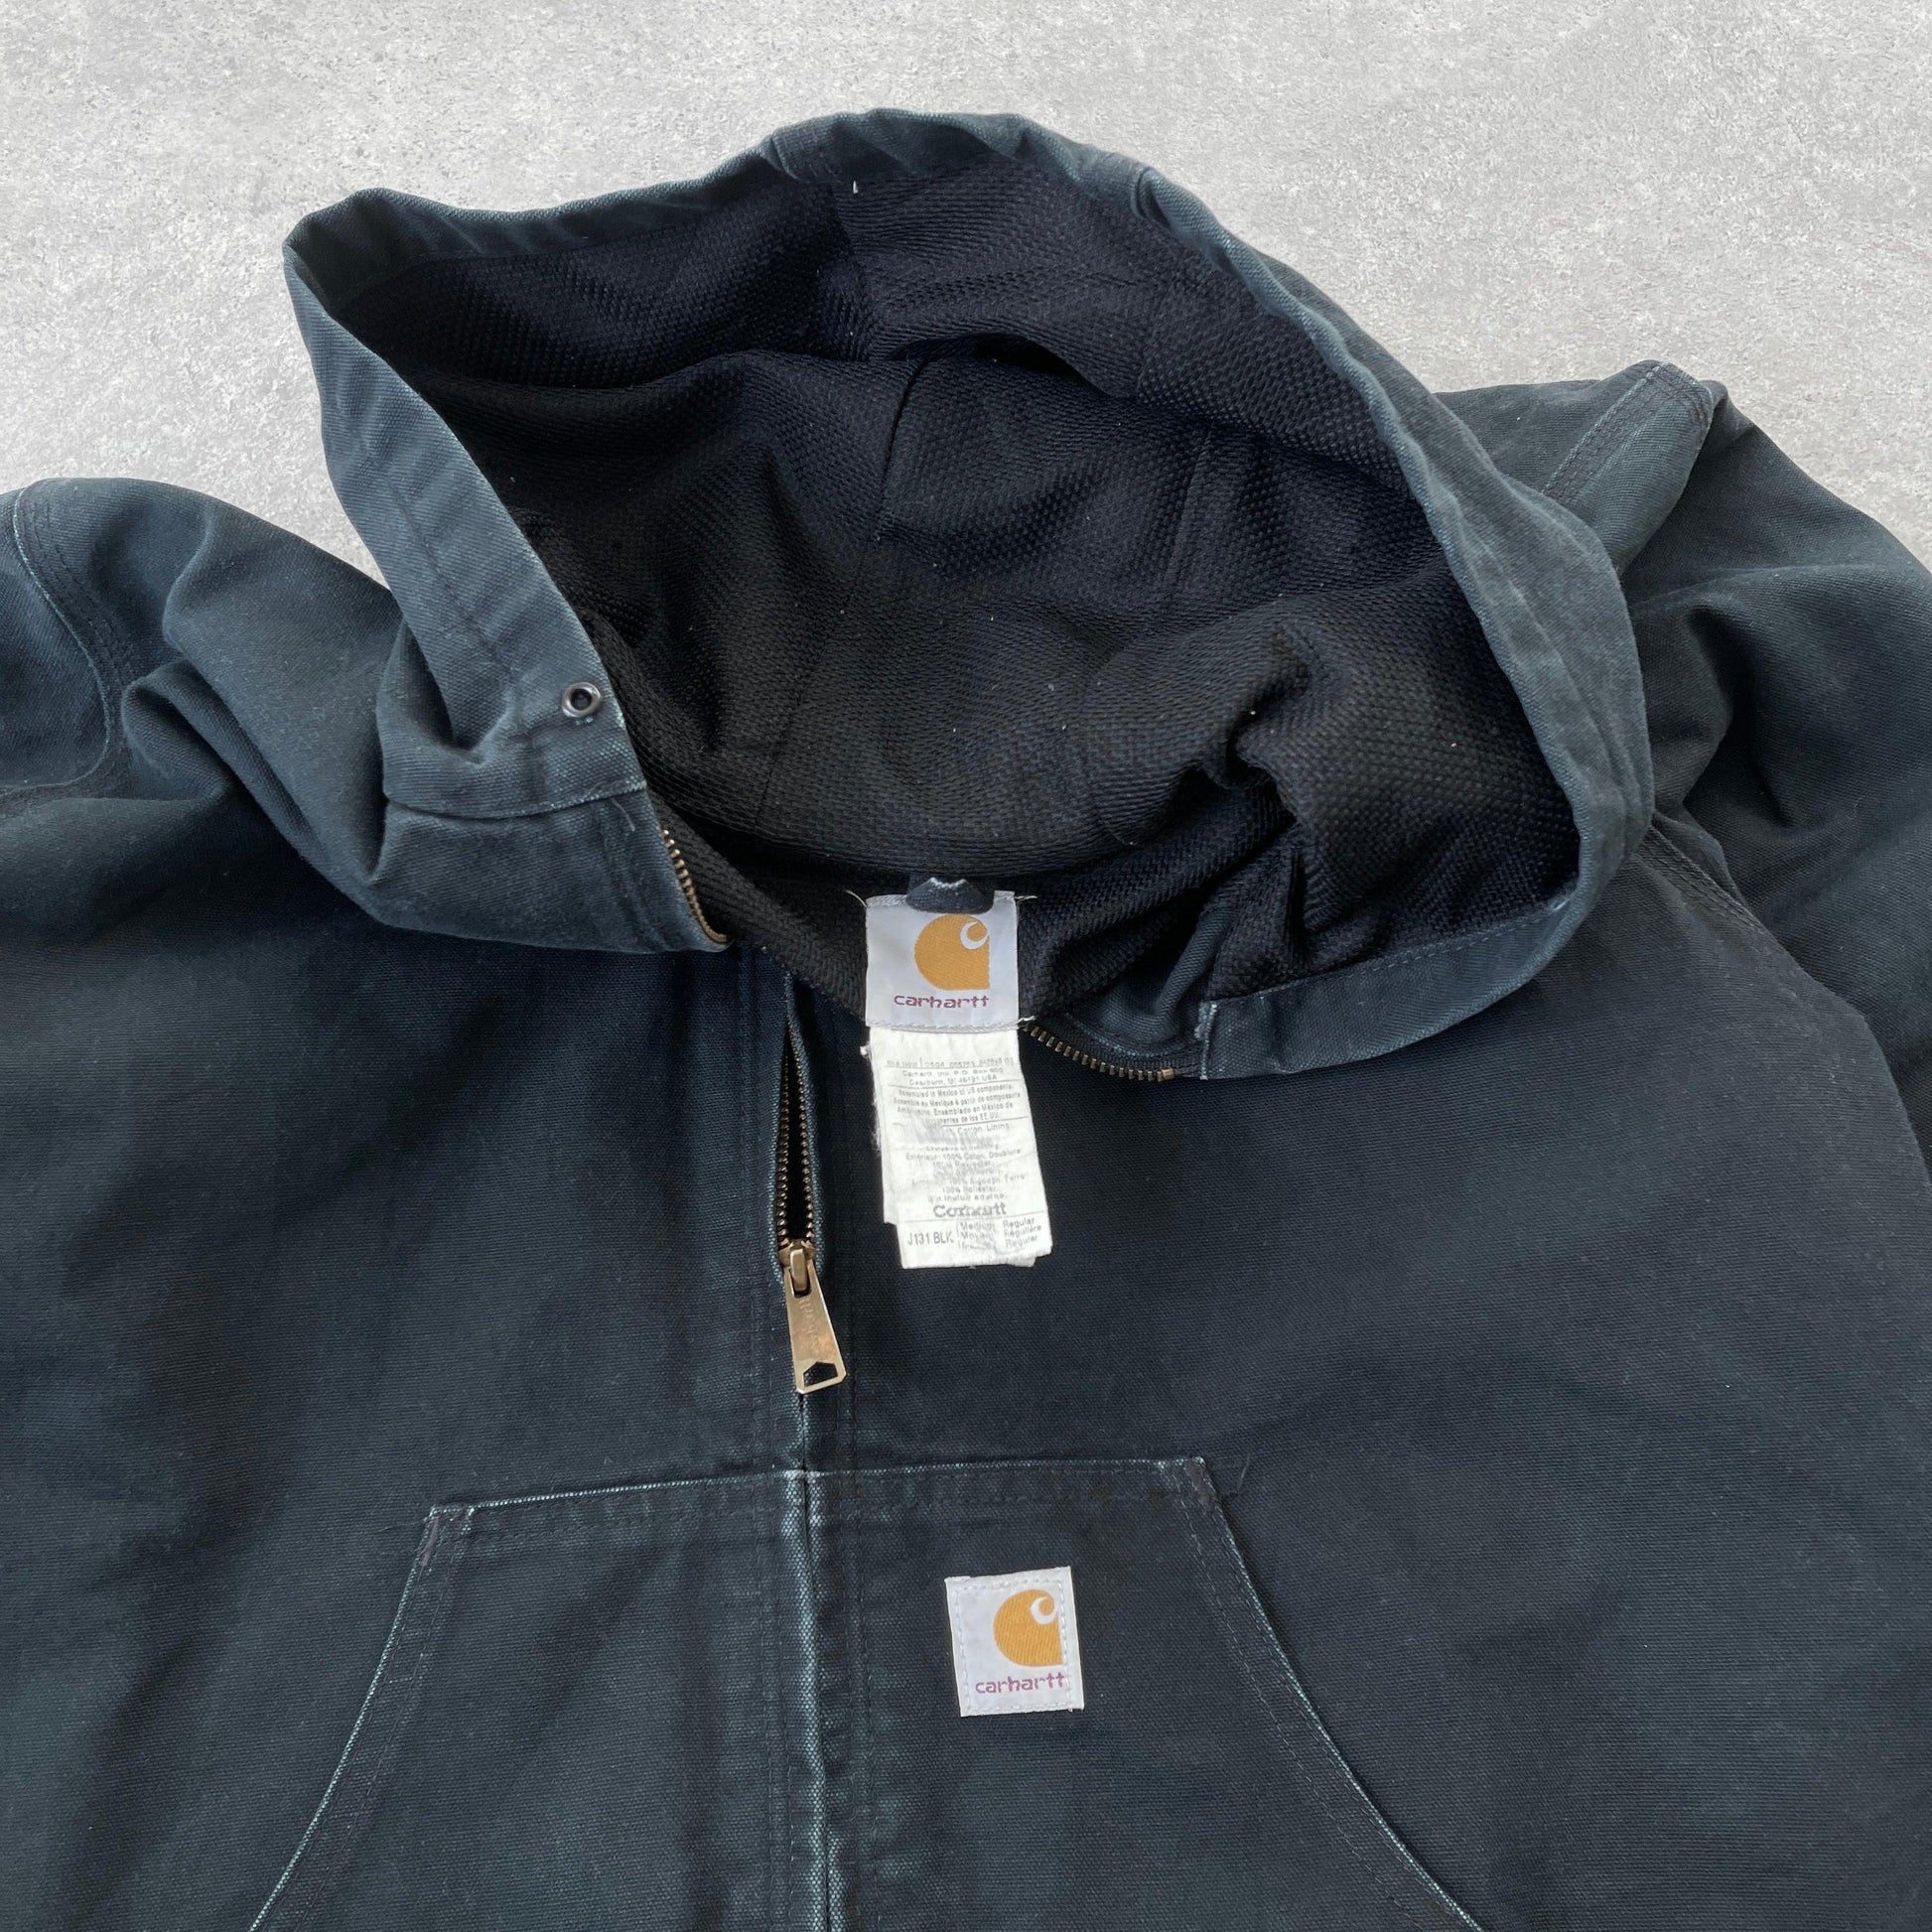 Carhartt 2004 heavyweight active hooded jacket (M) - Known Source